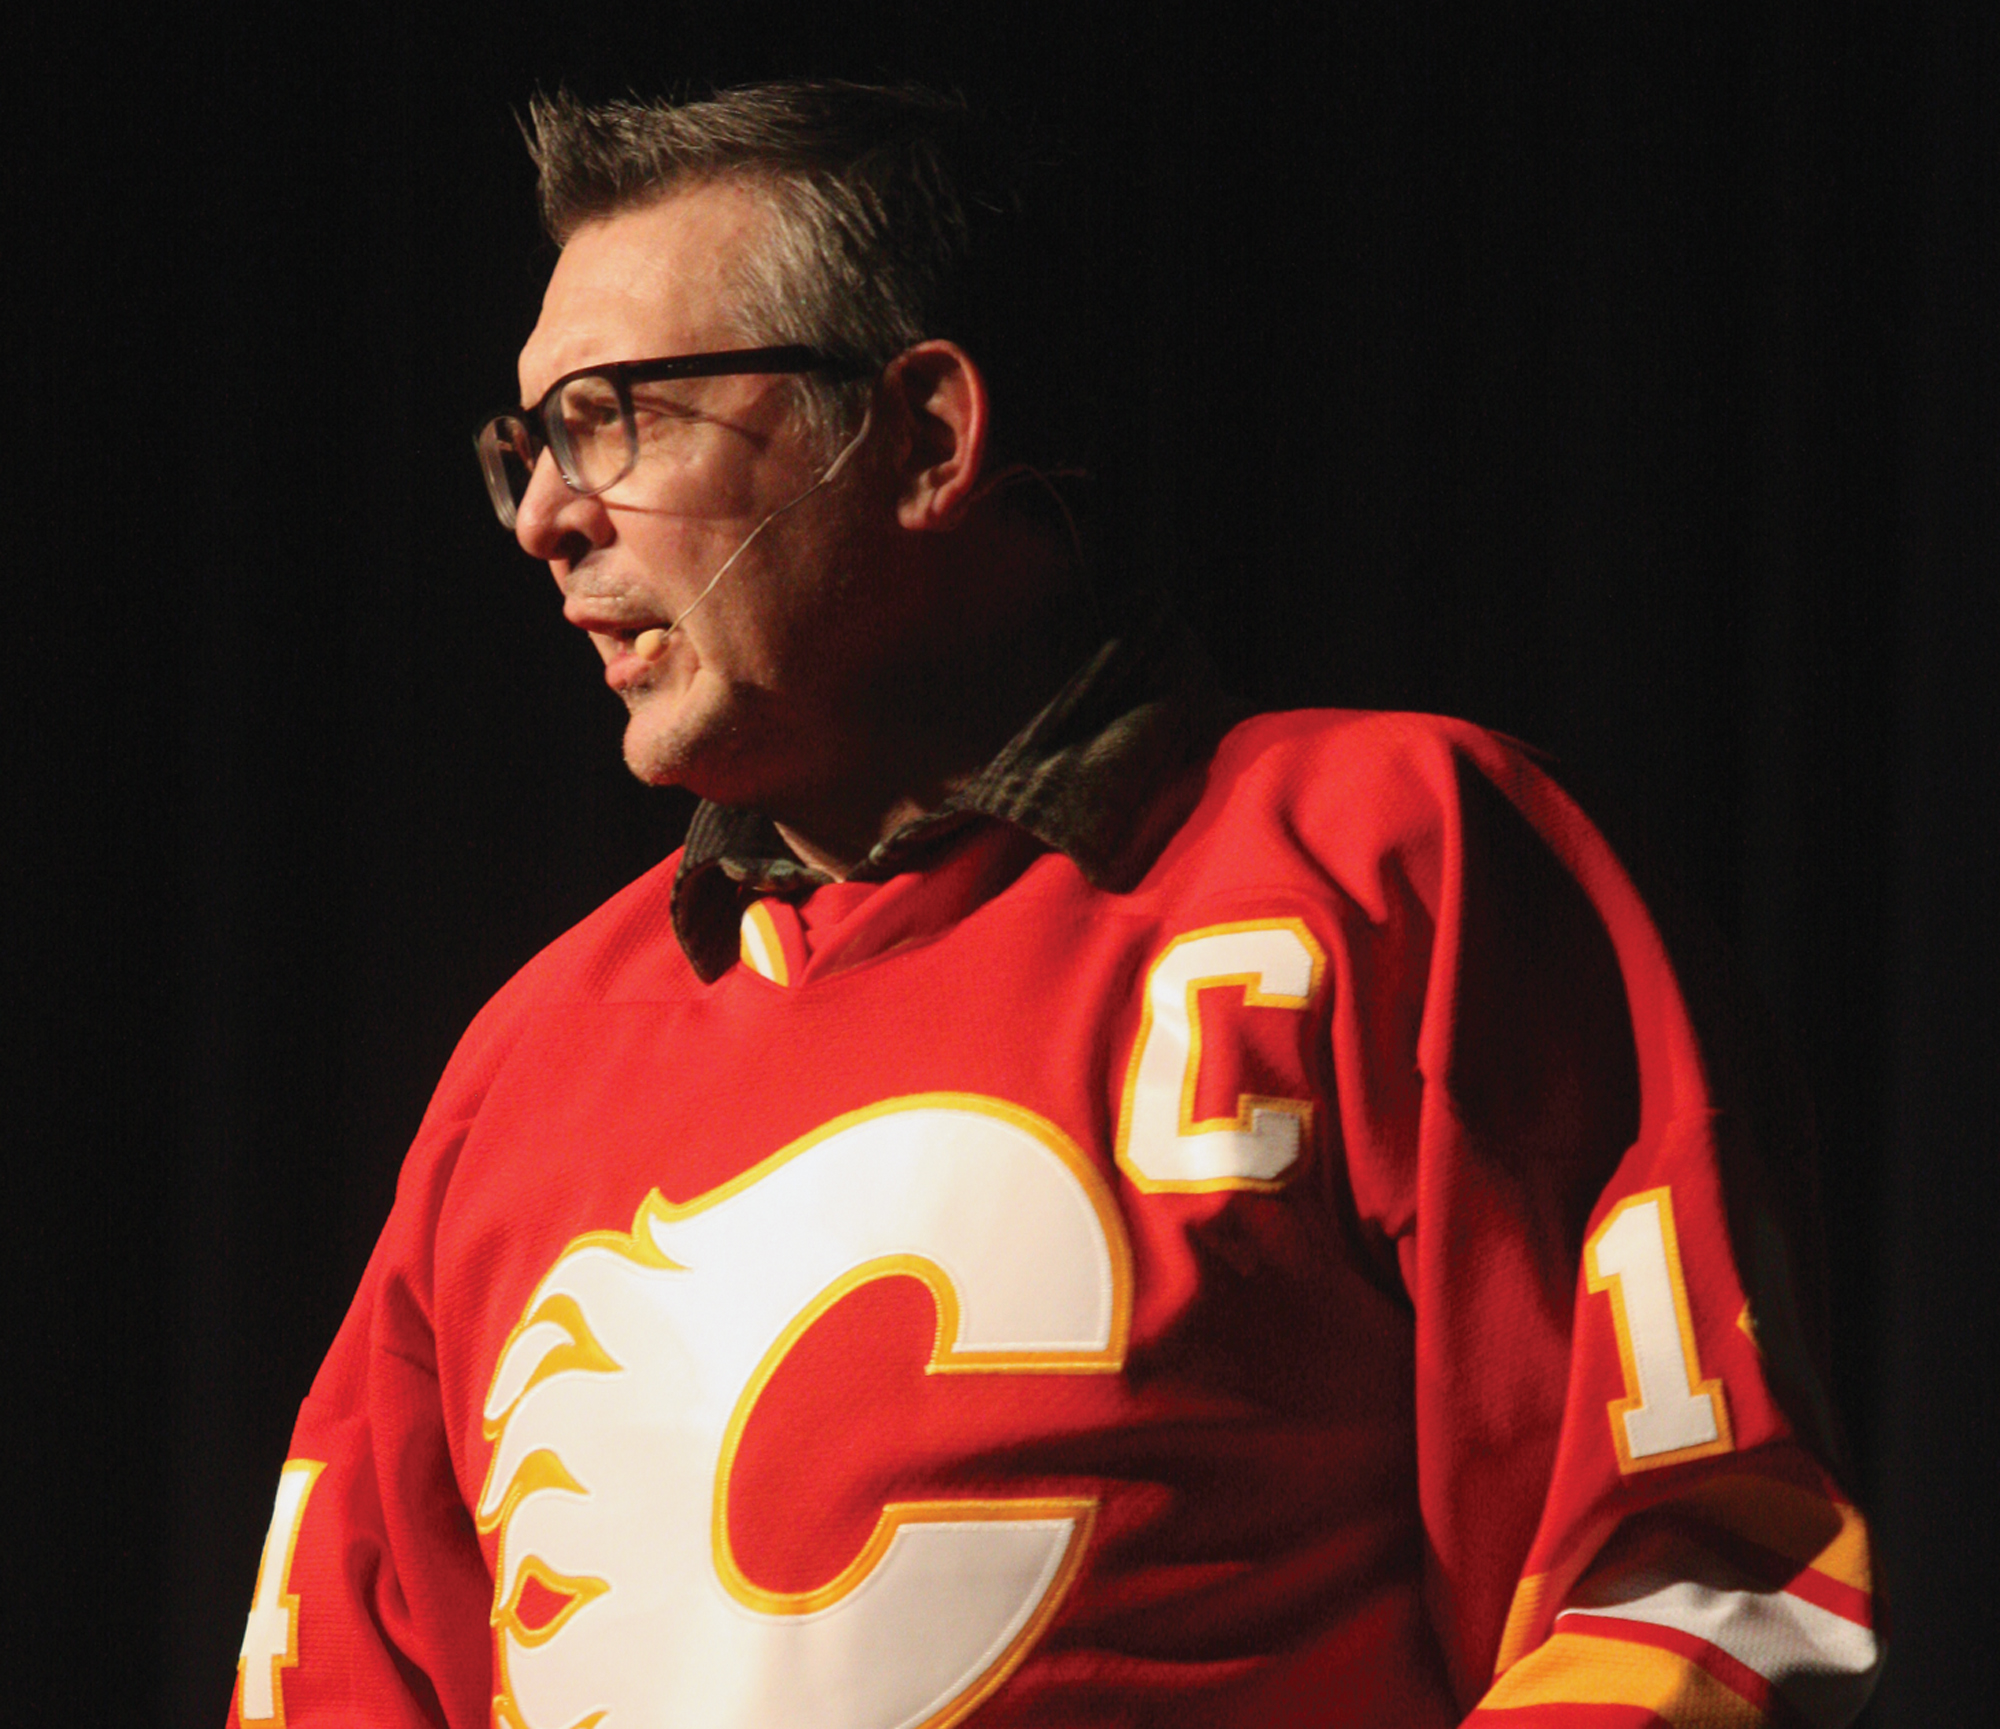 Whatever happened to the former NHL star Theo Fleury? - Quora